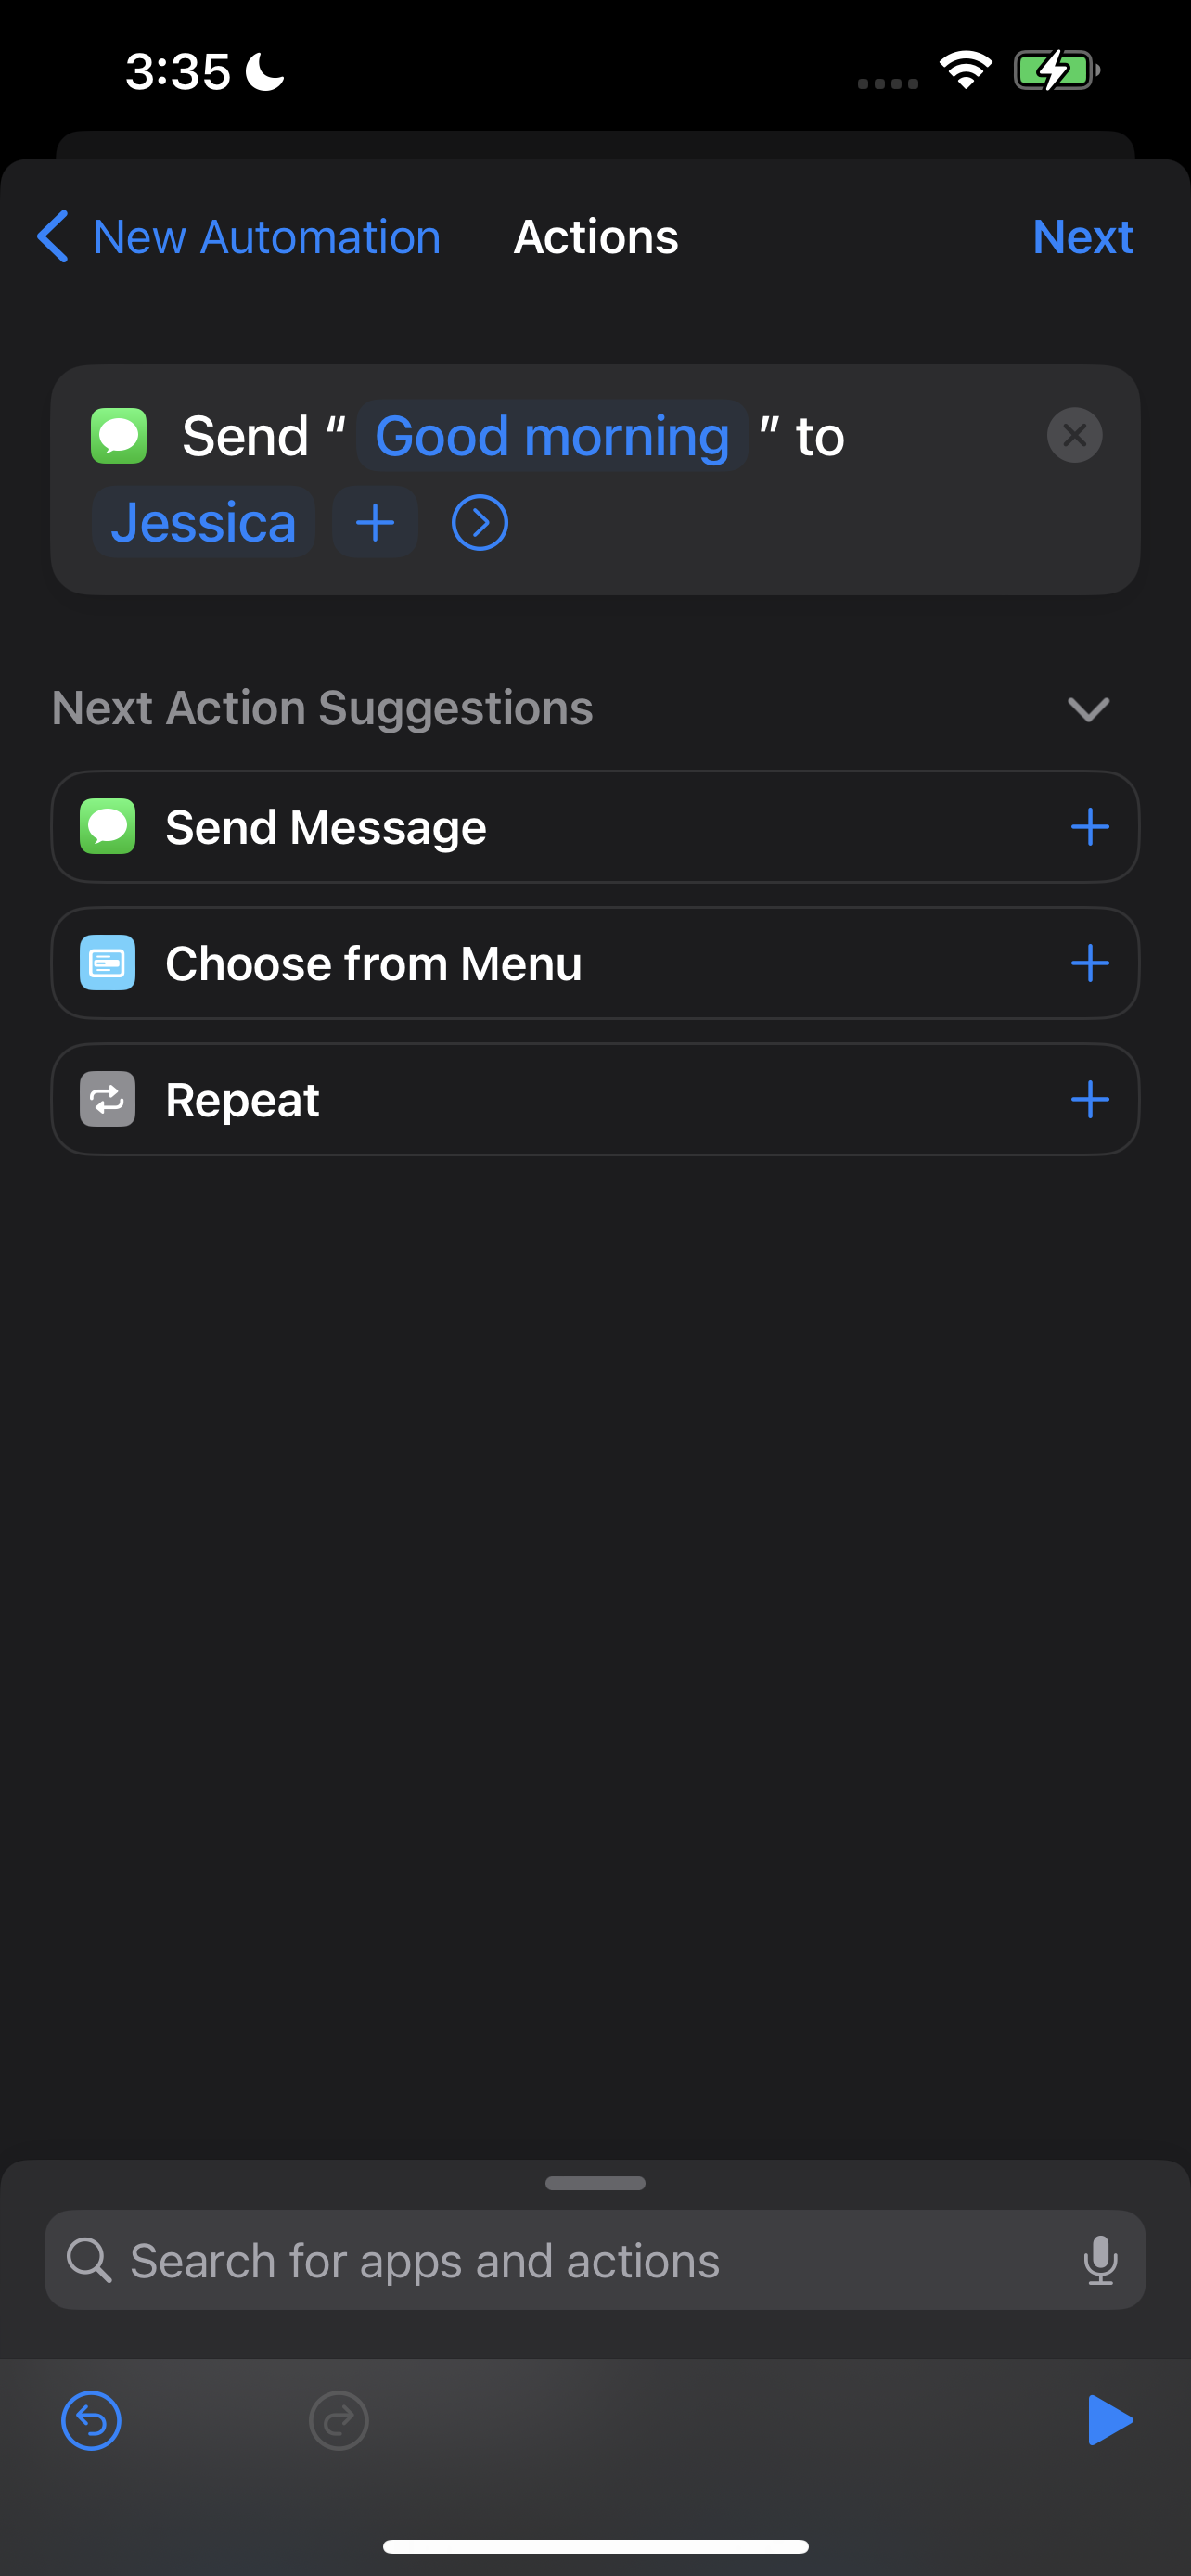 How to schedule text messages on iPhone